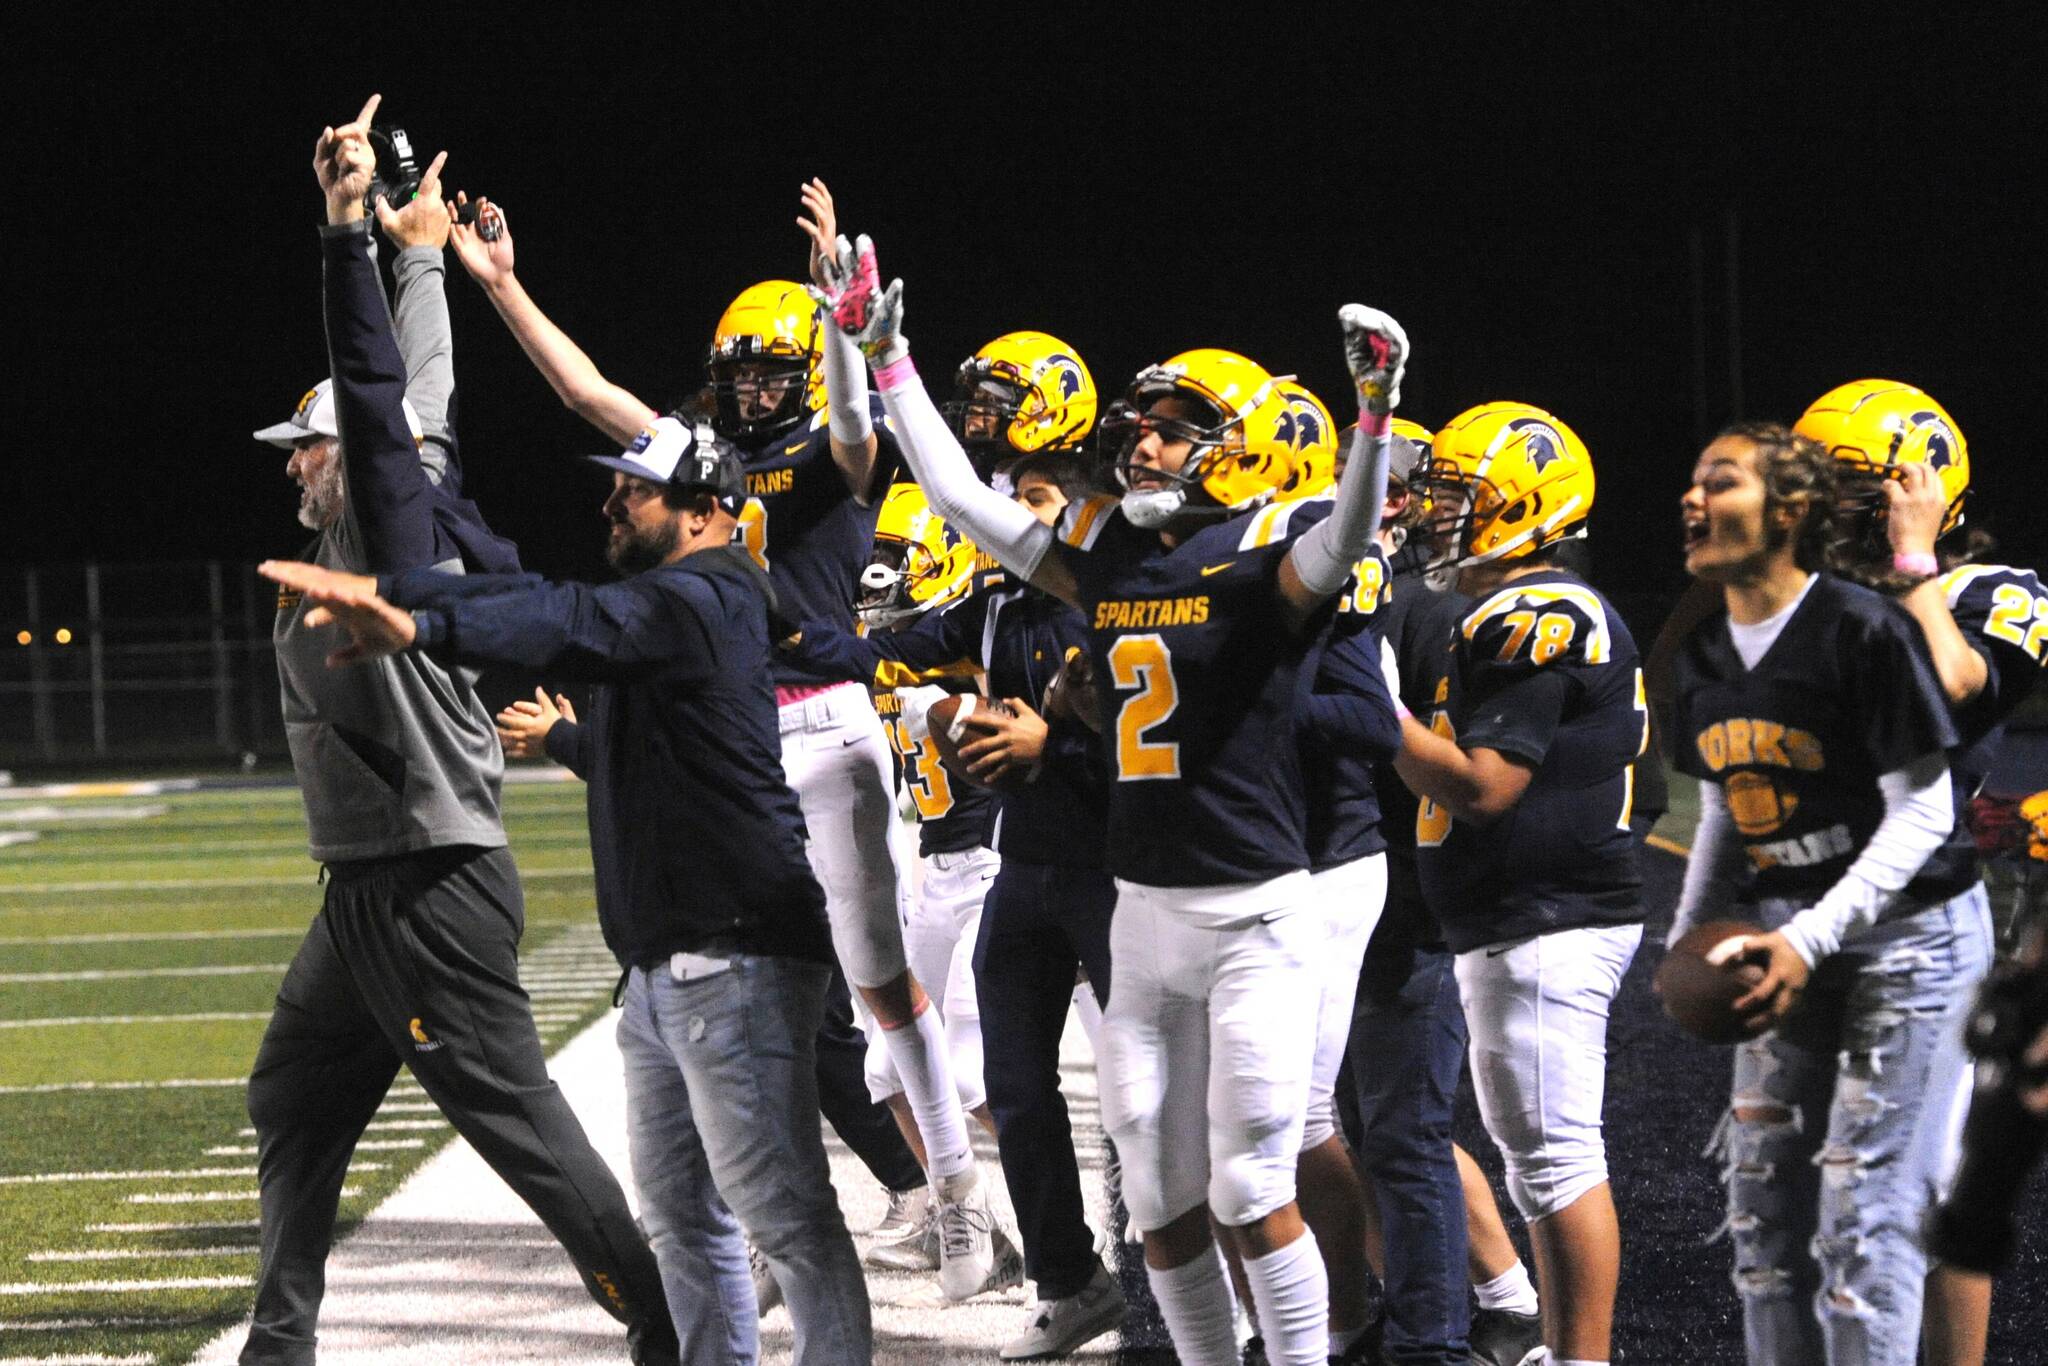 Forks coaches and players begin to celebrate their win over the Titans 21 to 18 Friday night on the turf of Spartan Stadium. Photo by Lonnie Archibald